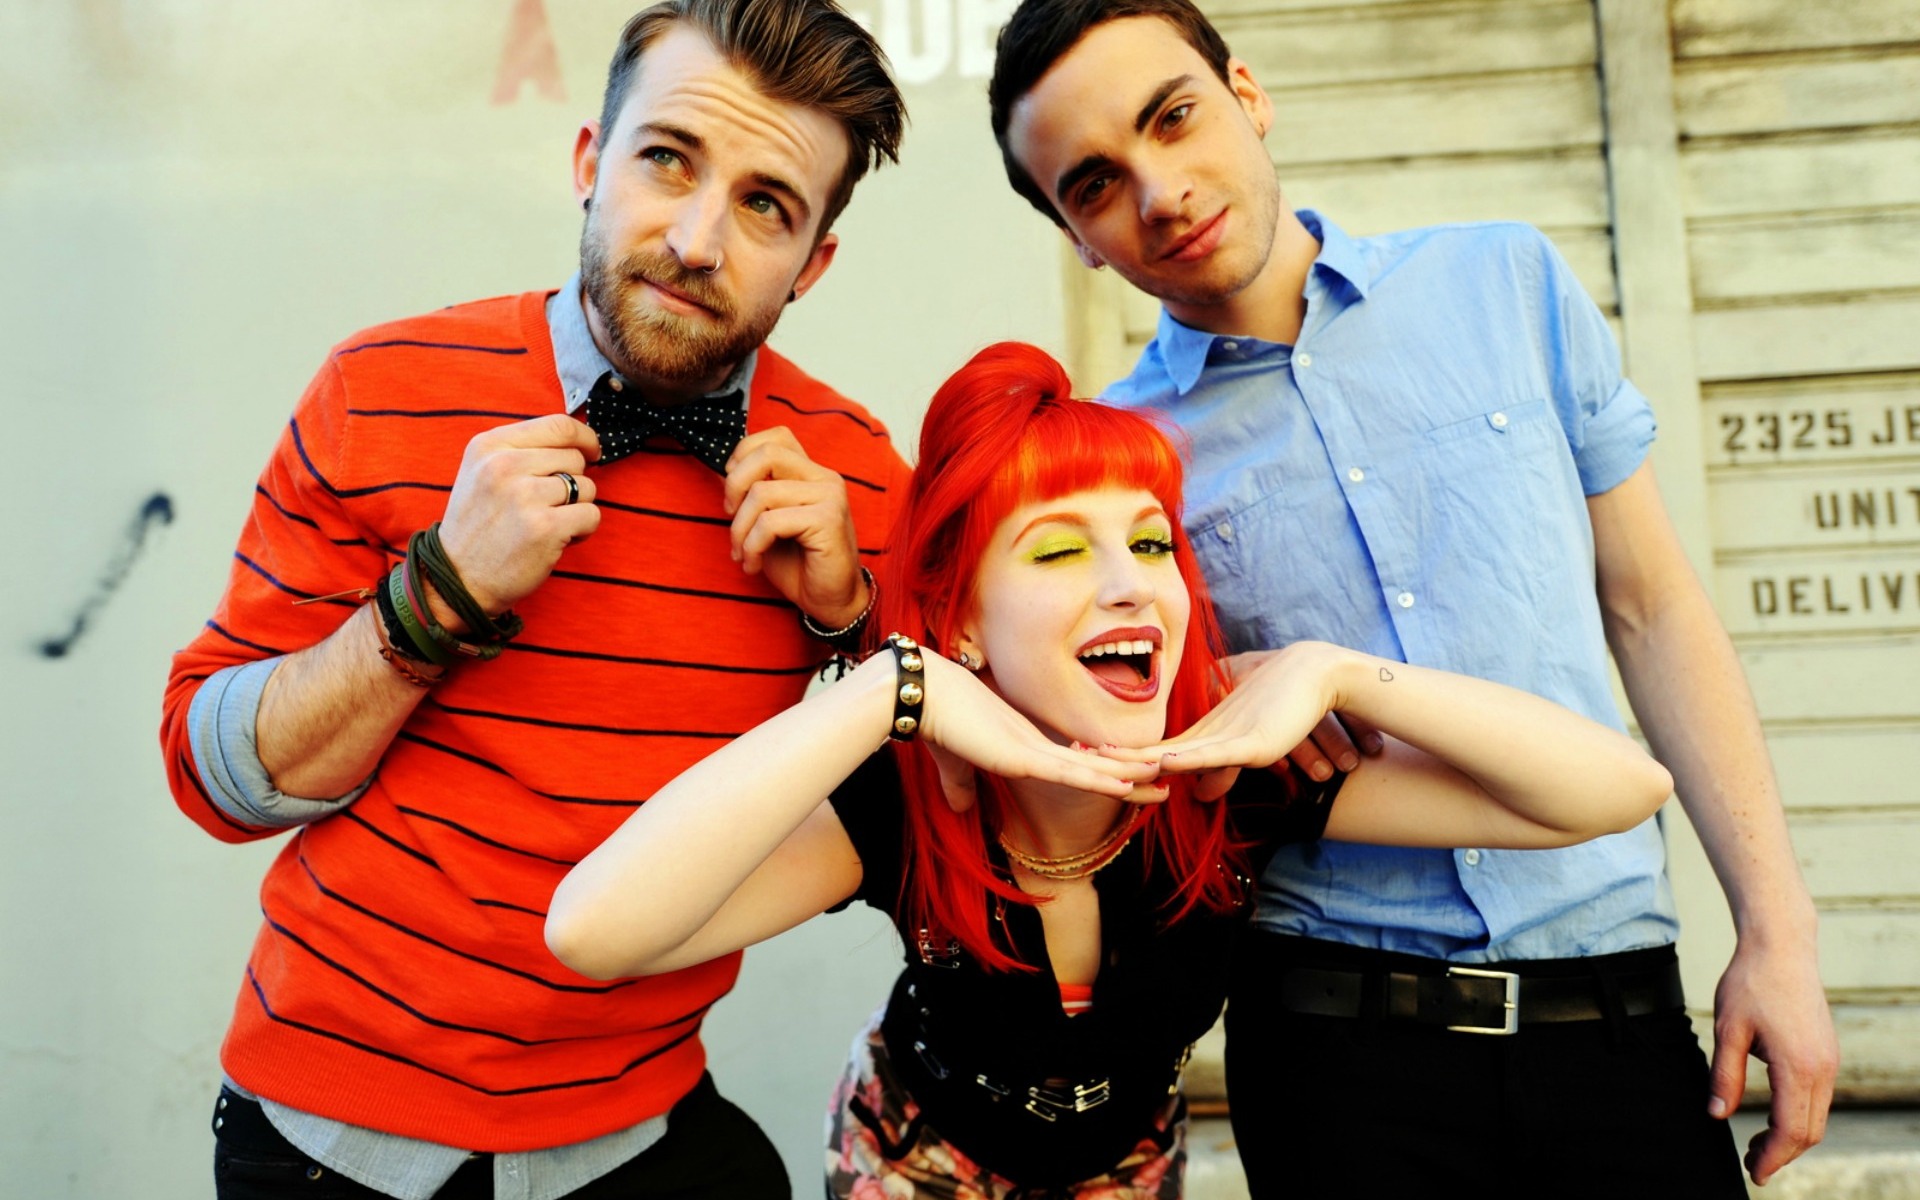 Paramore 25435 1920x1080 px